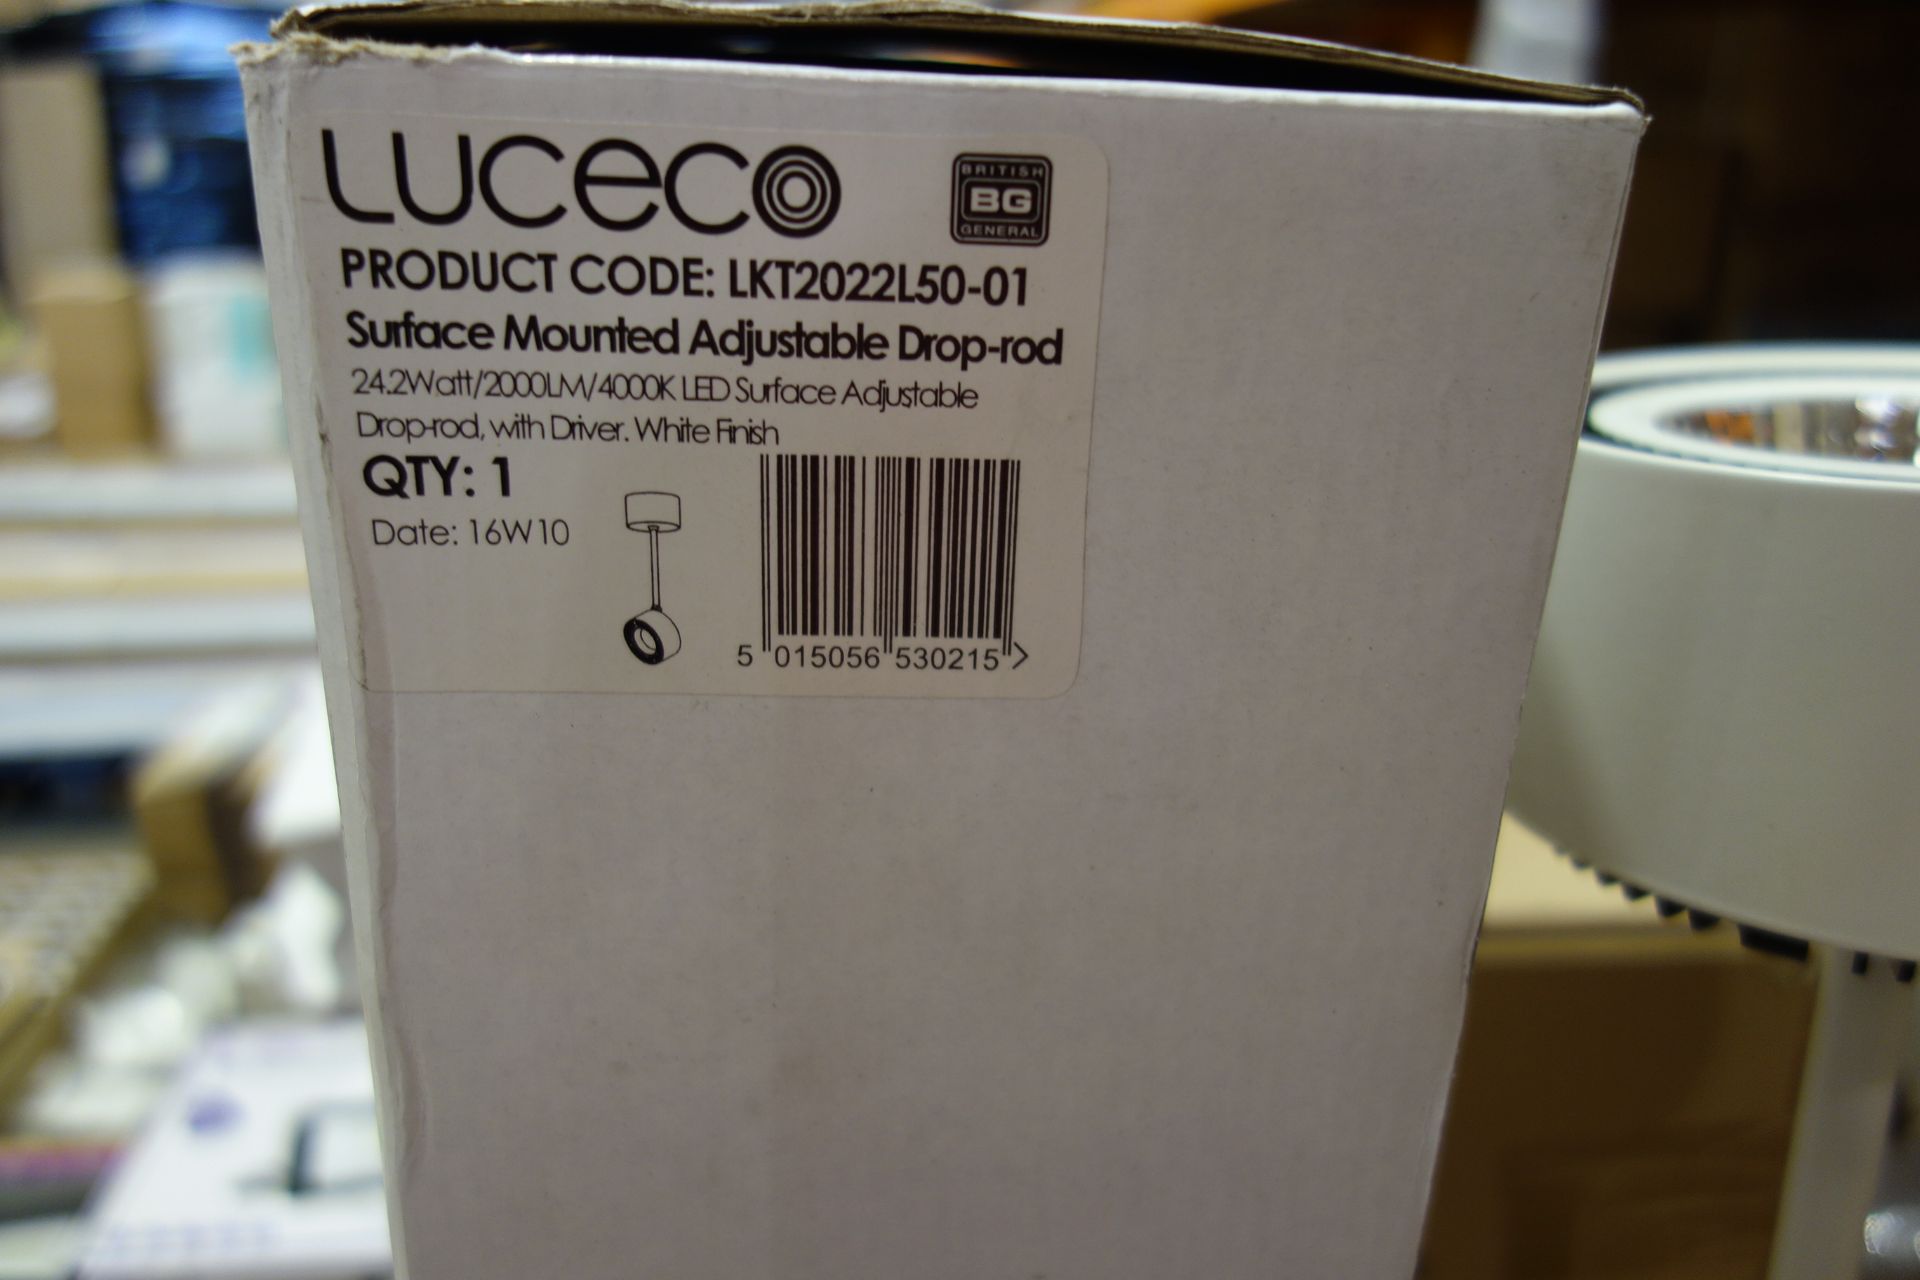 12 X Luceco LKT 2022L50-01 24 2 W LED Surface Mounted Adjustable Drop Rod Light Fitting 4000K 2000